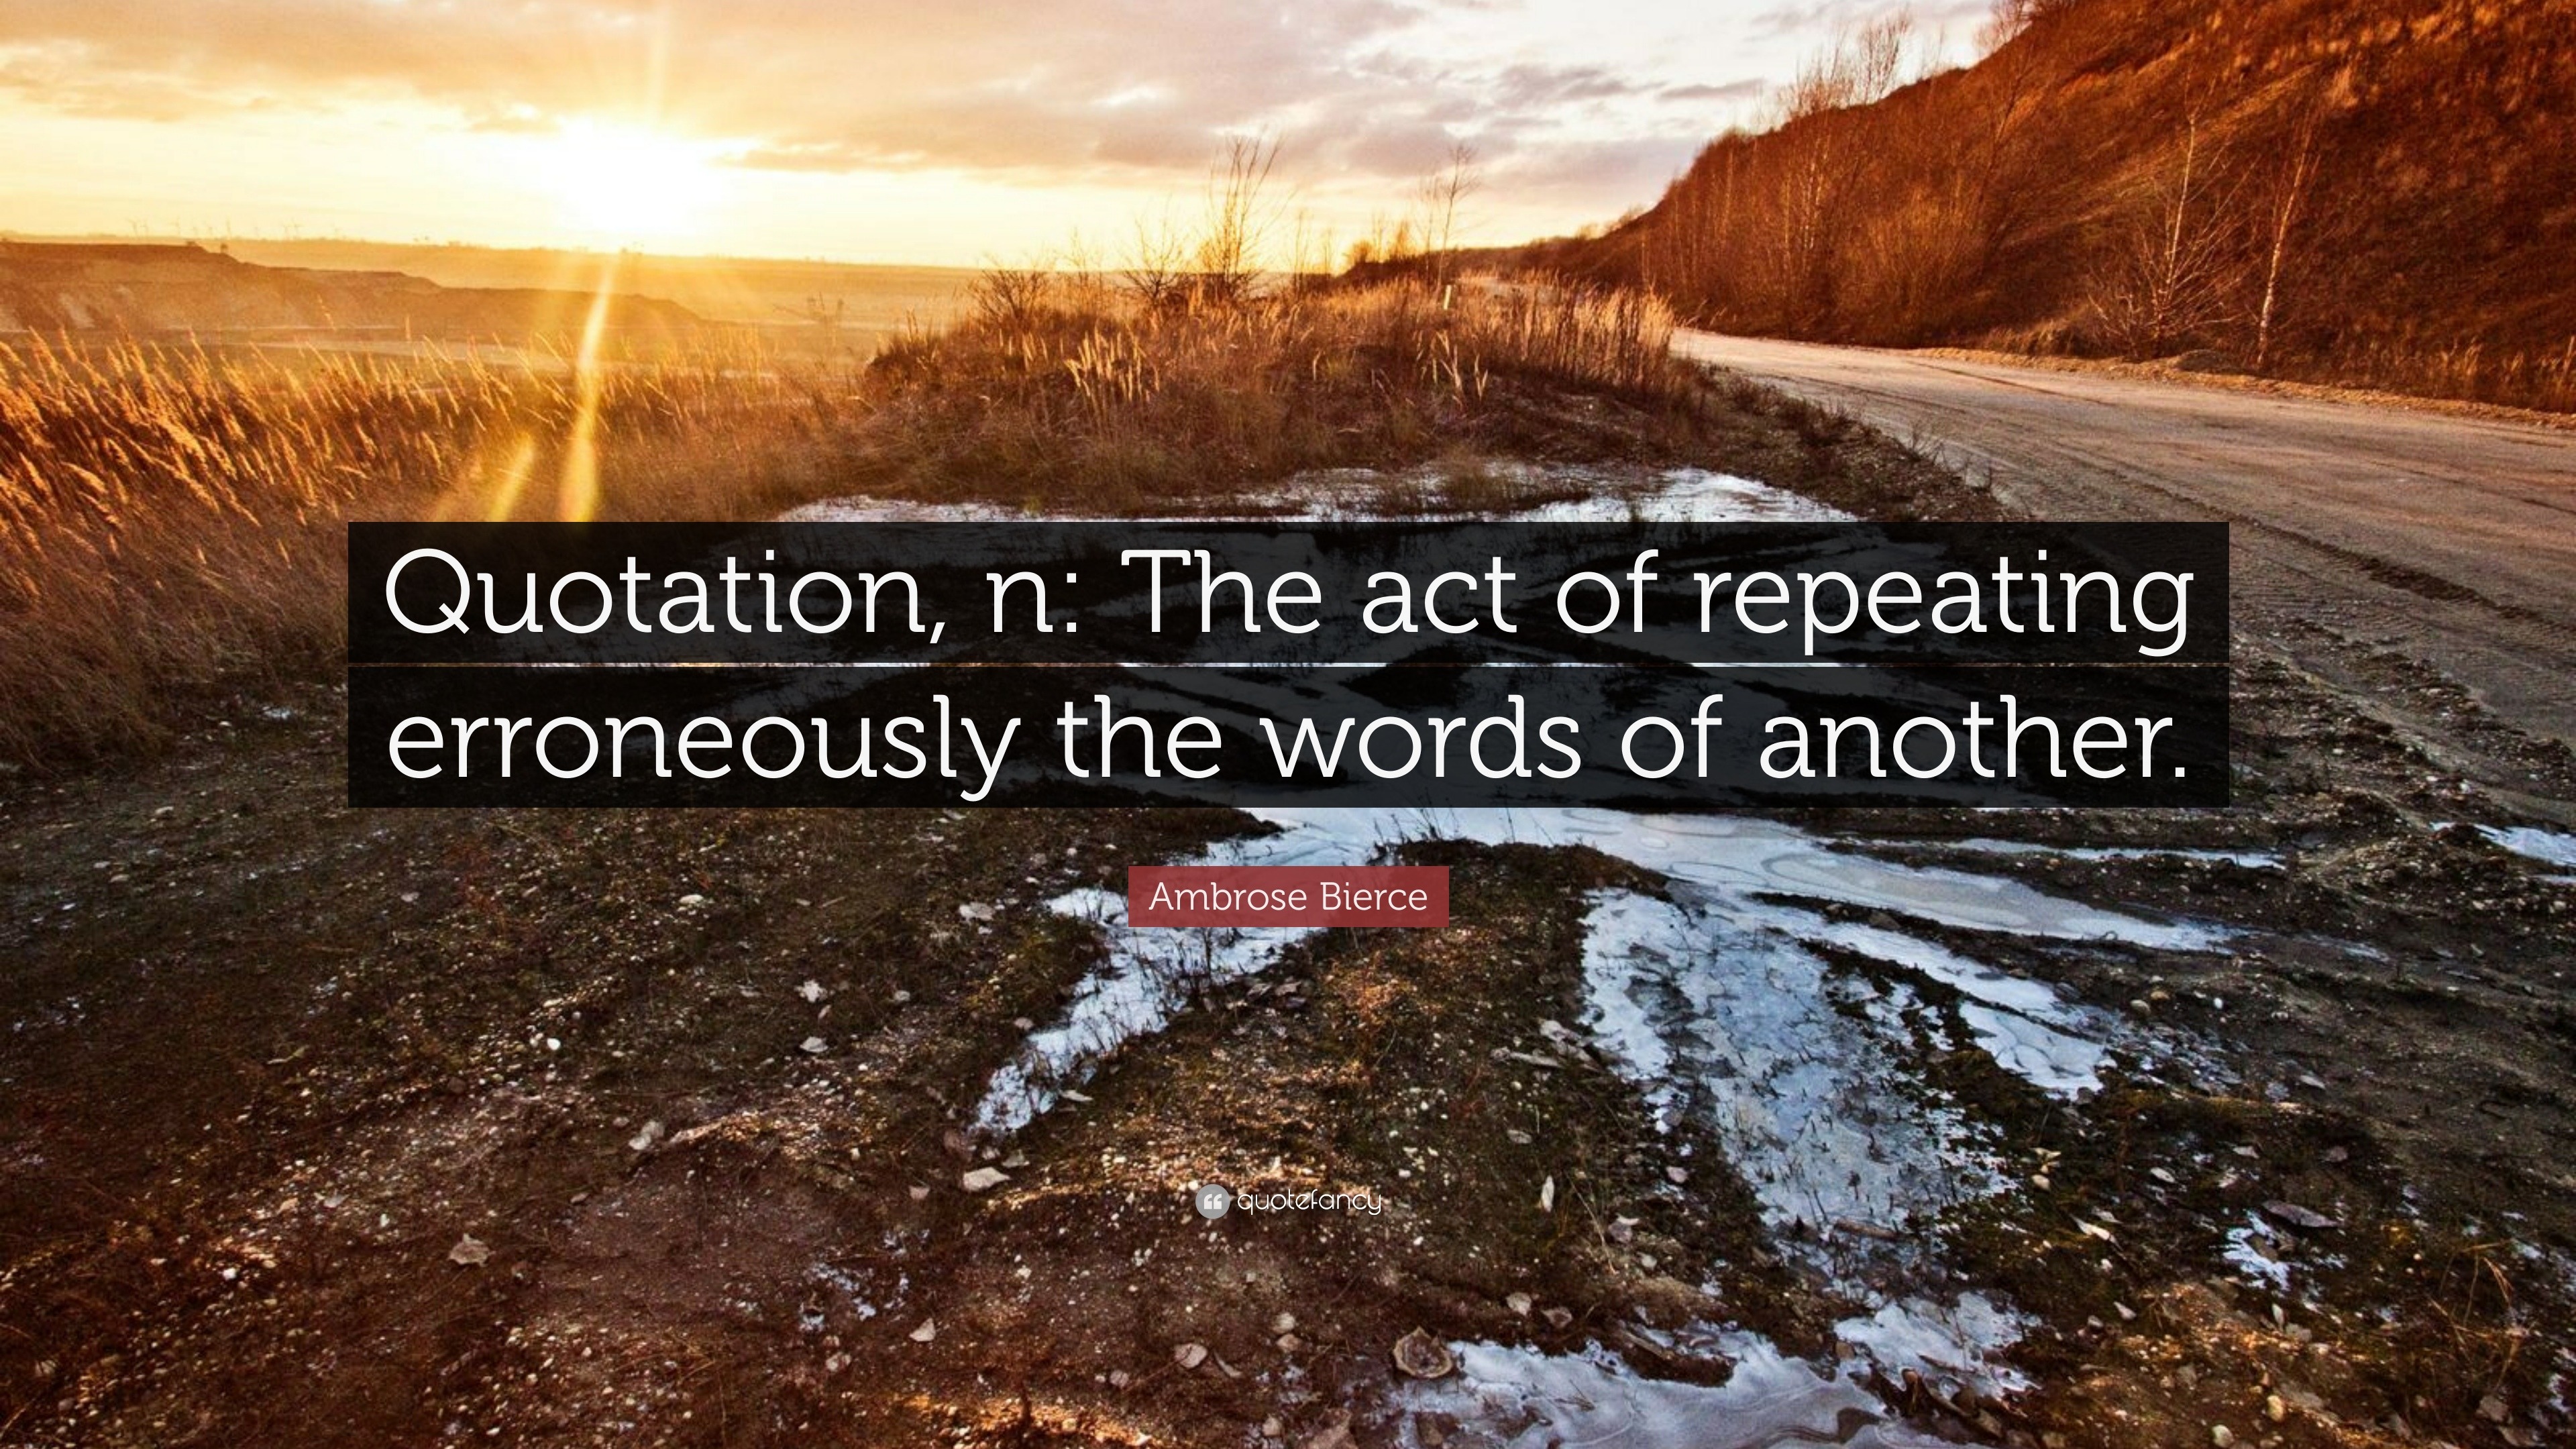 Pin on Quotation, n: The act of repeating erroneously the words of another.